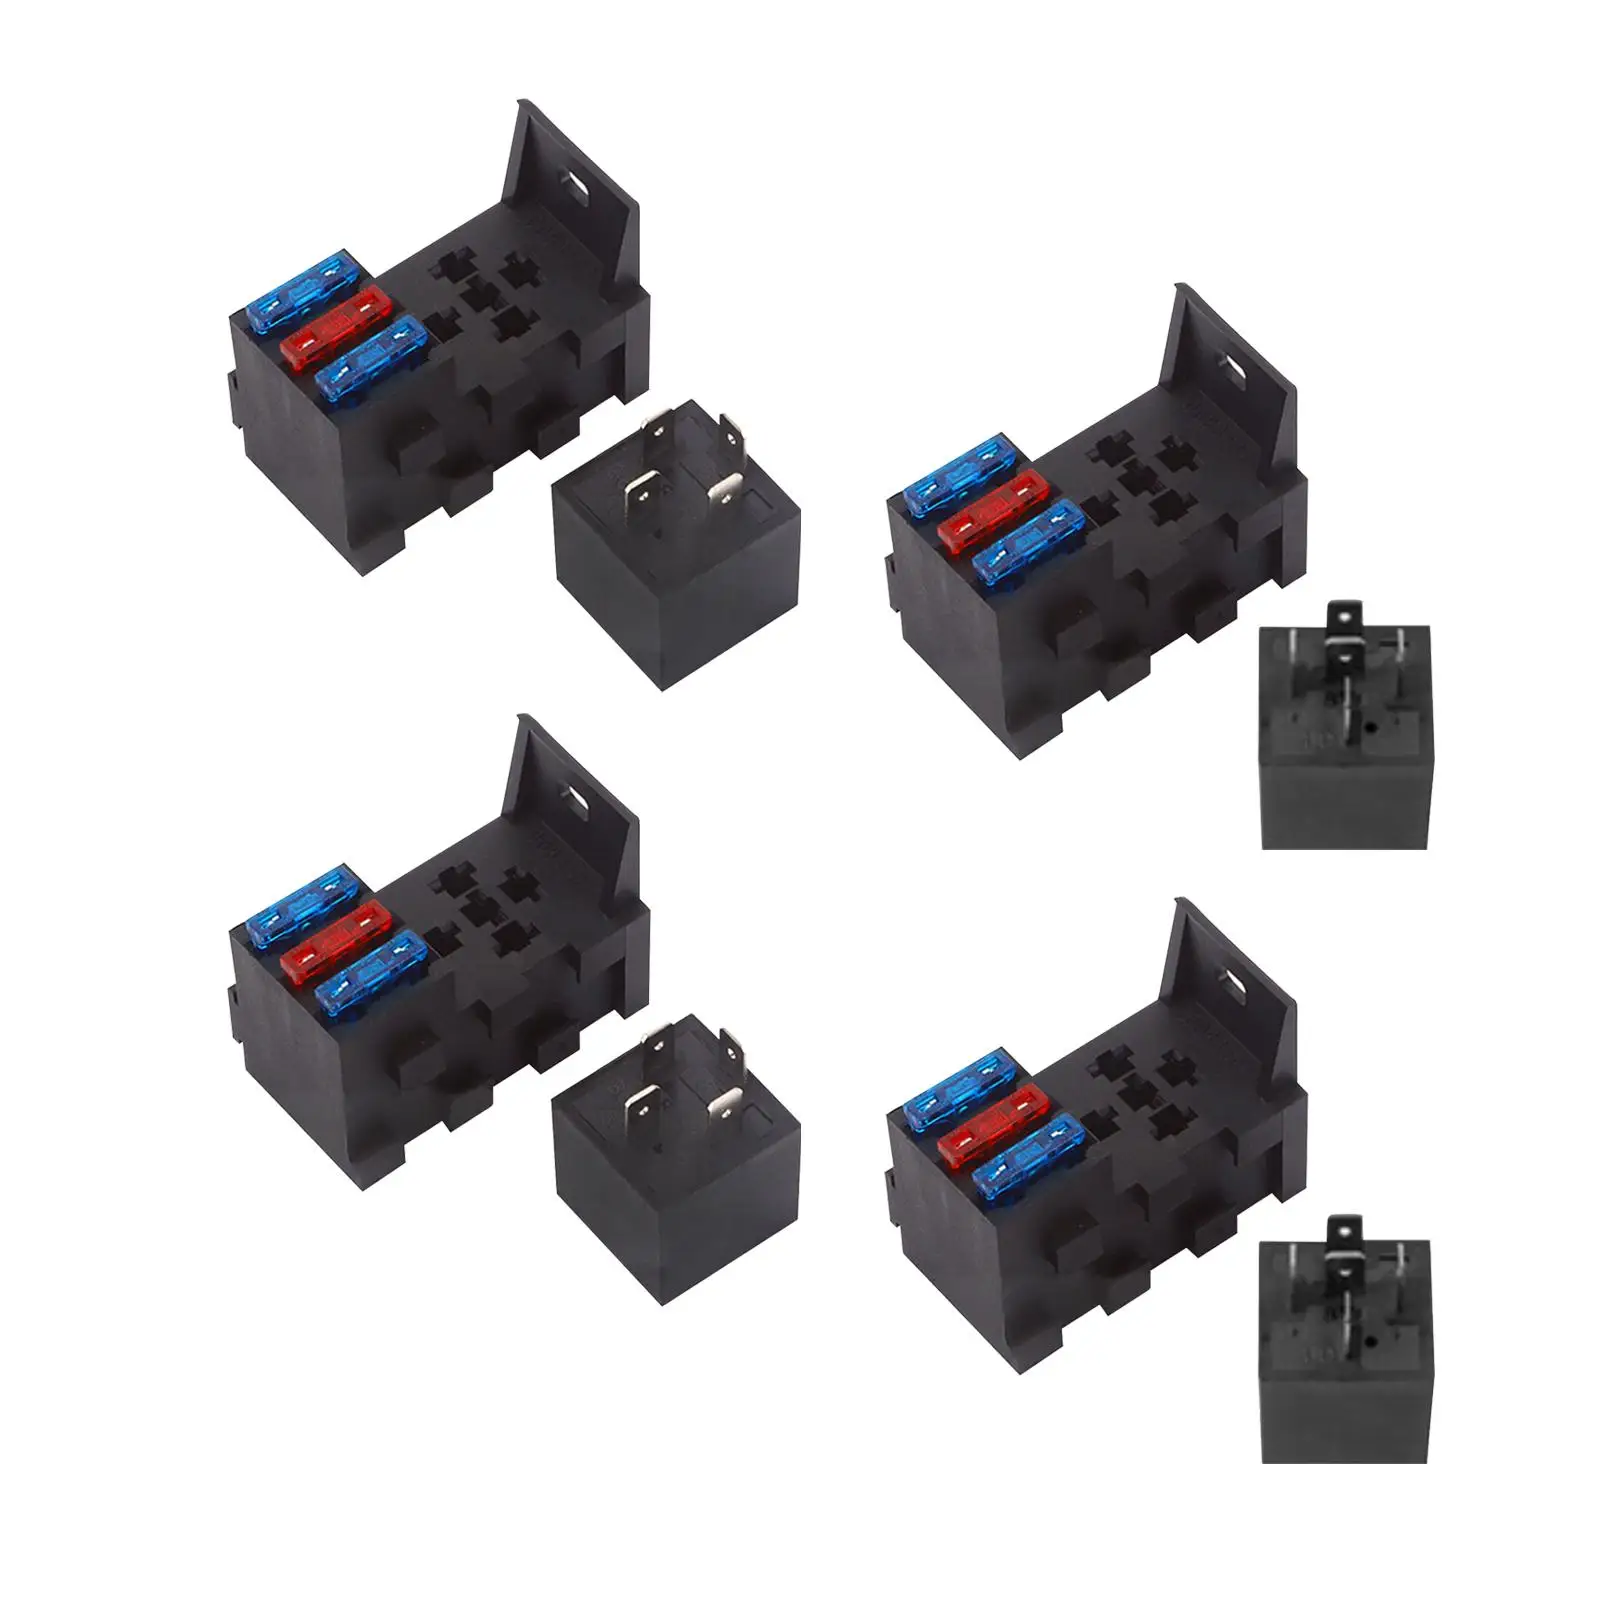 Electromagnetic Relay 3 Way High Temperature Resistant 40A with Terminals Waterproof for Truck Yacht Camper Trailer Marine